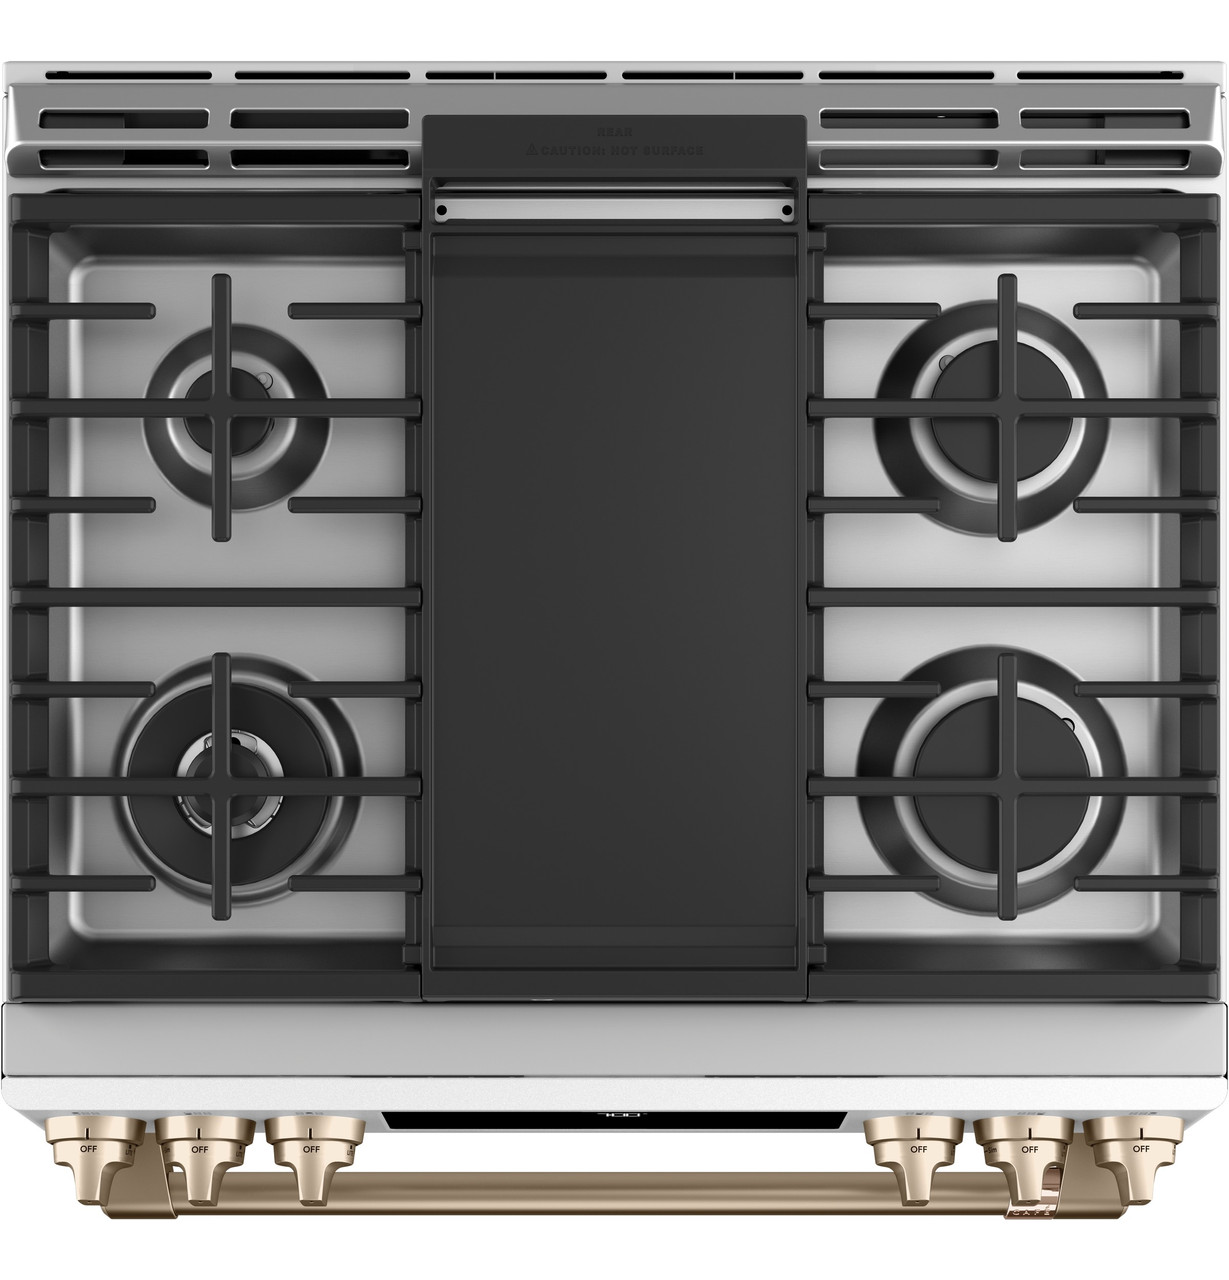 Café™ 30 Smart Slide-In, Front-Control, Gas Range with Convection Oven -  CGS700P4MW2 - Cafe Appliances